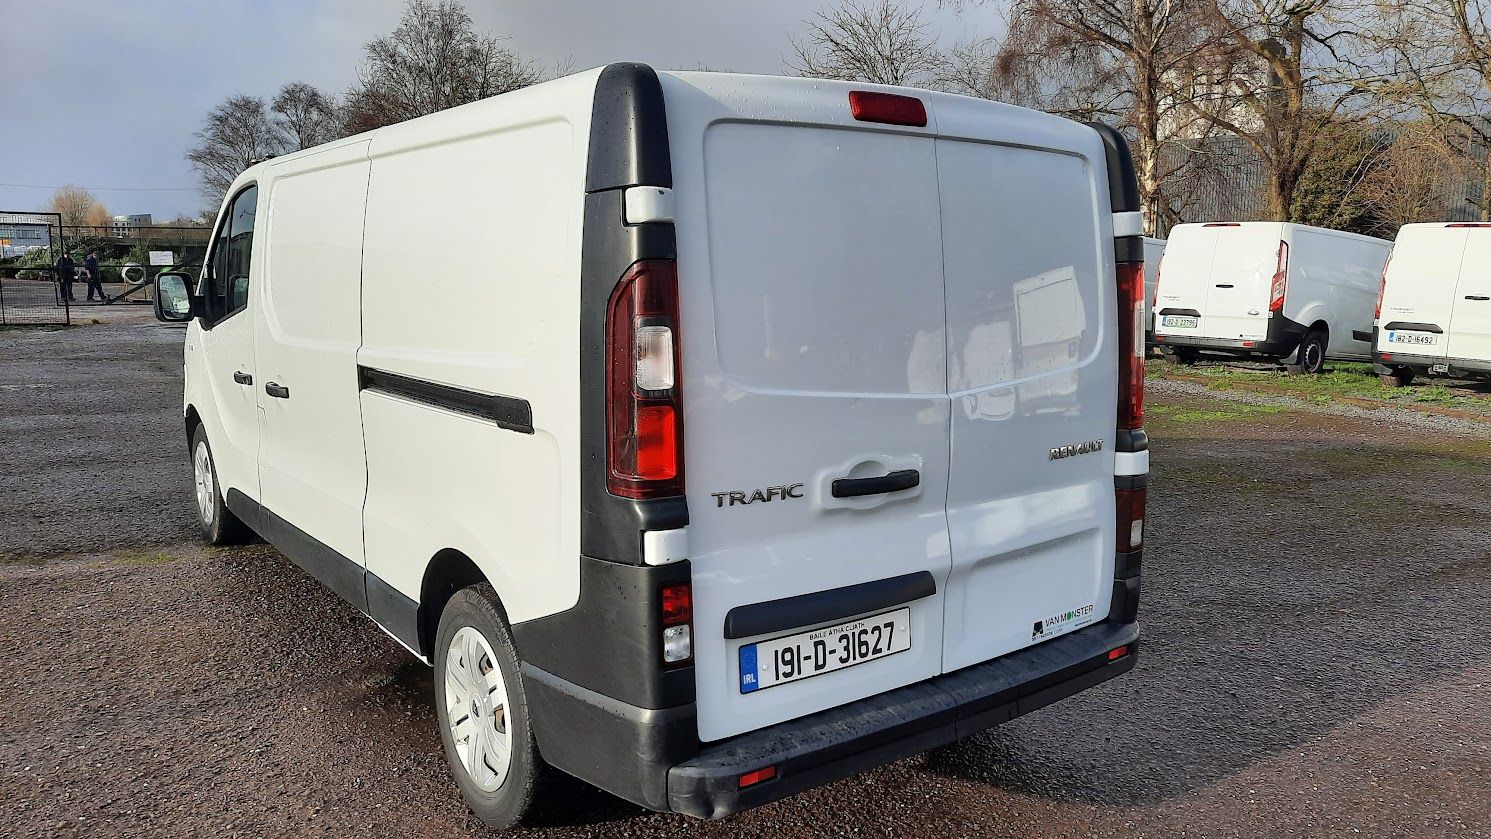 2019 Renault Trafic LL29 DCI 120 Business (191D31627) Thumbnail 10